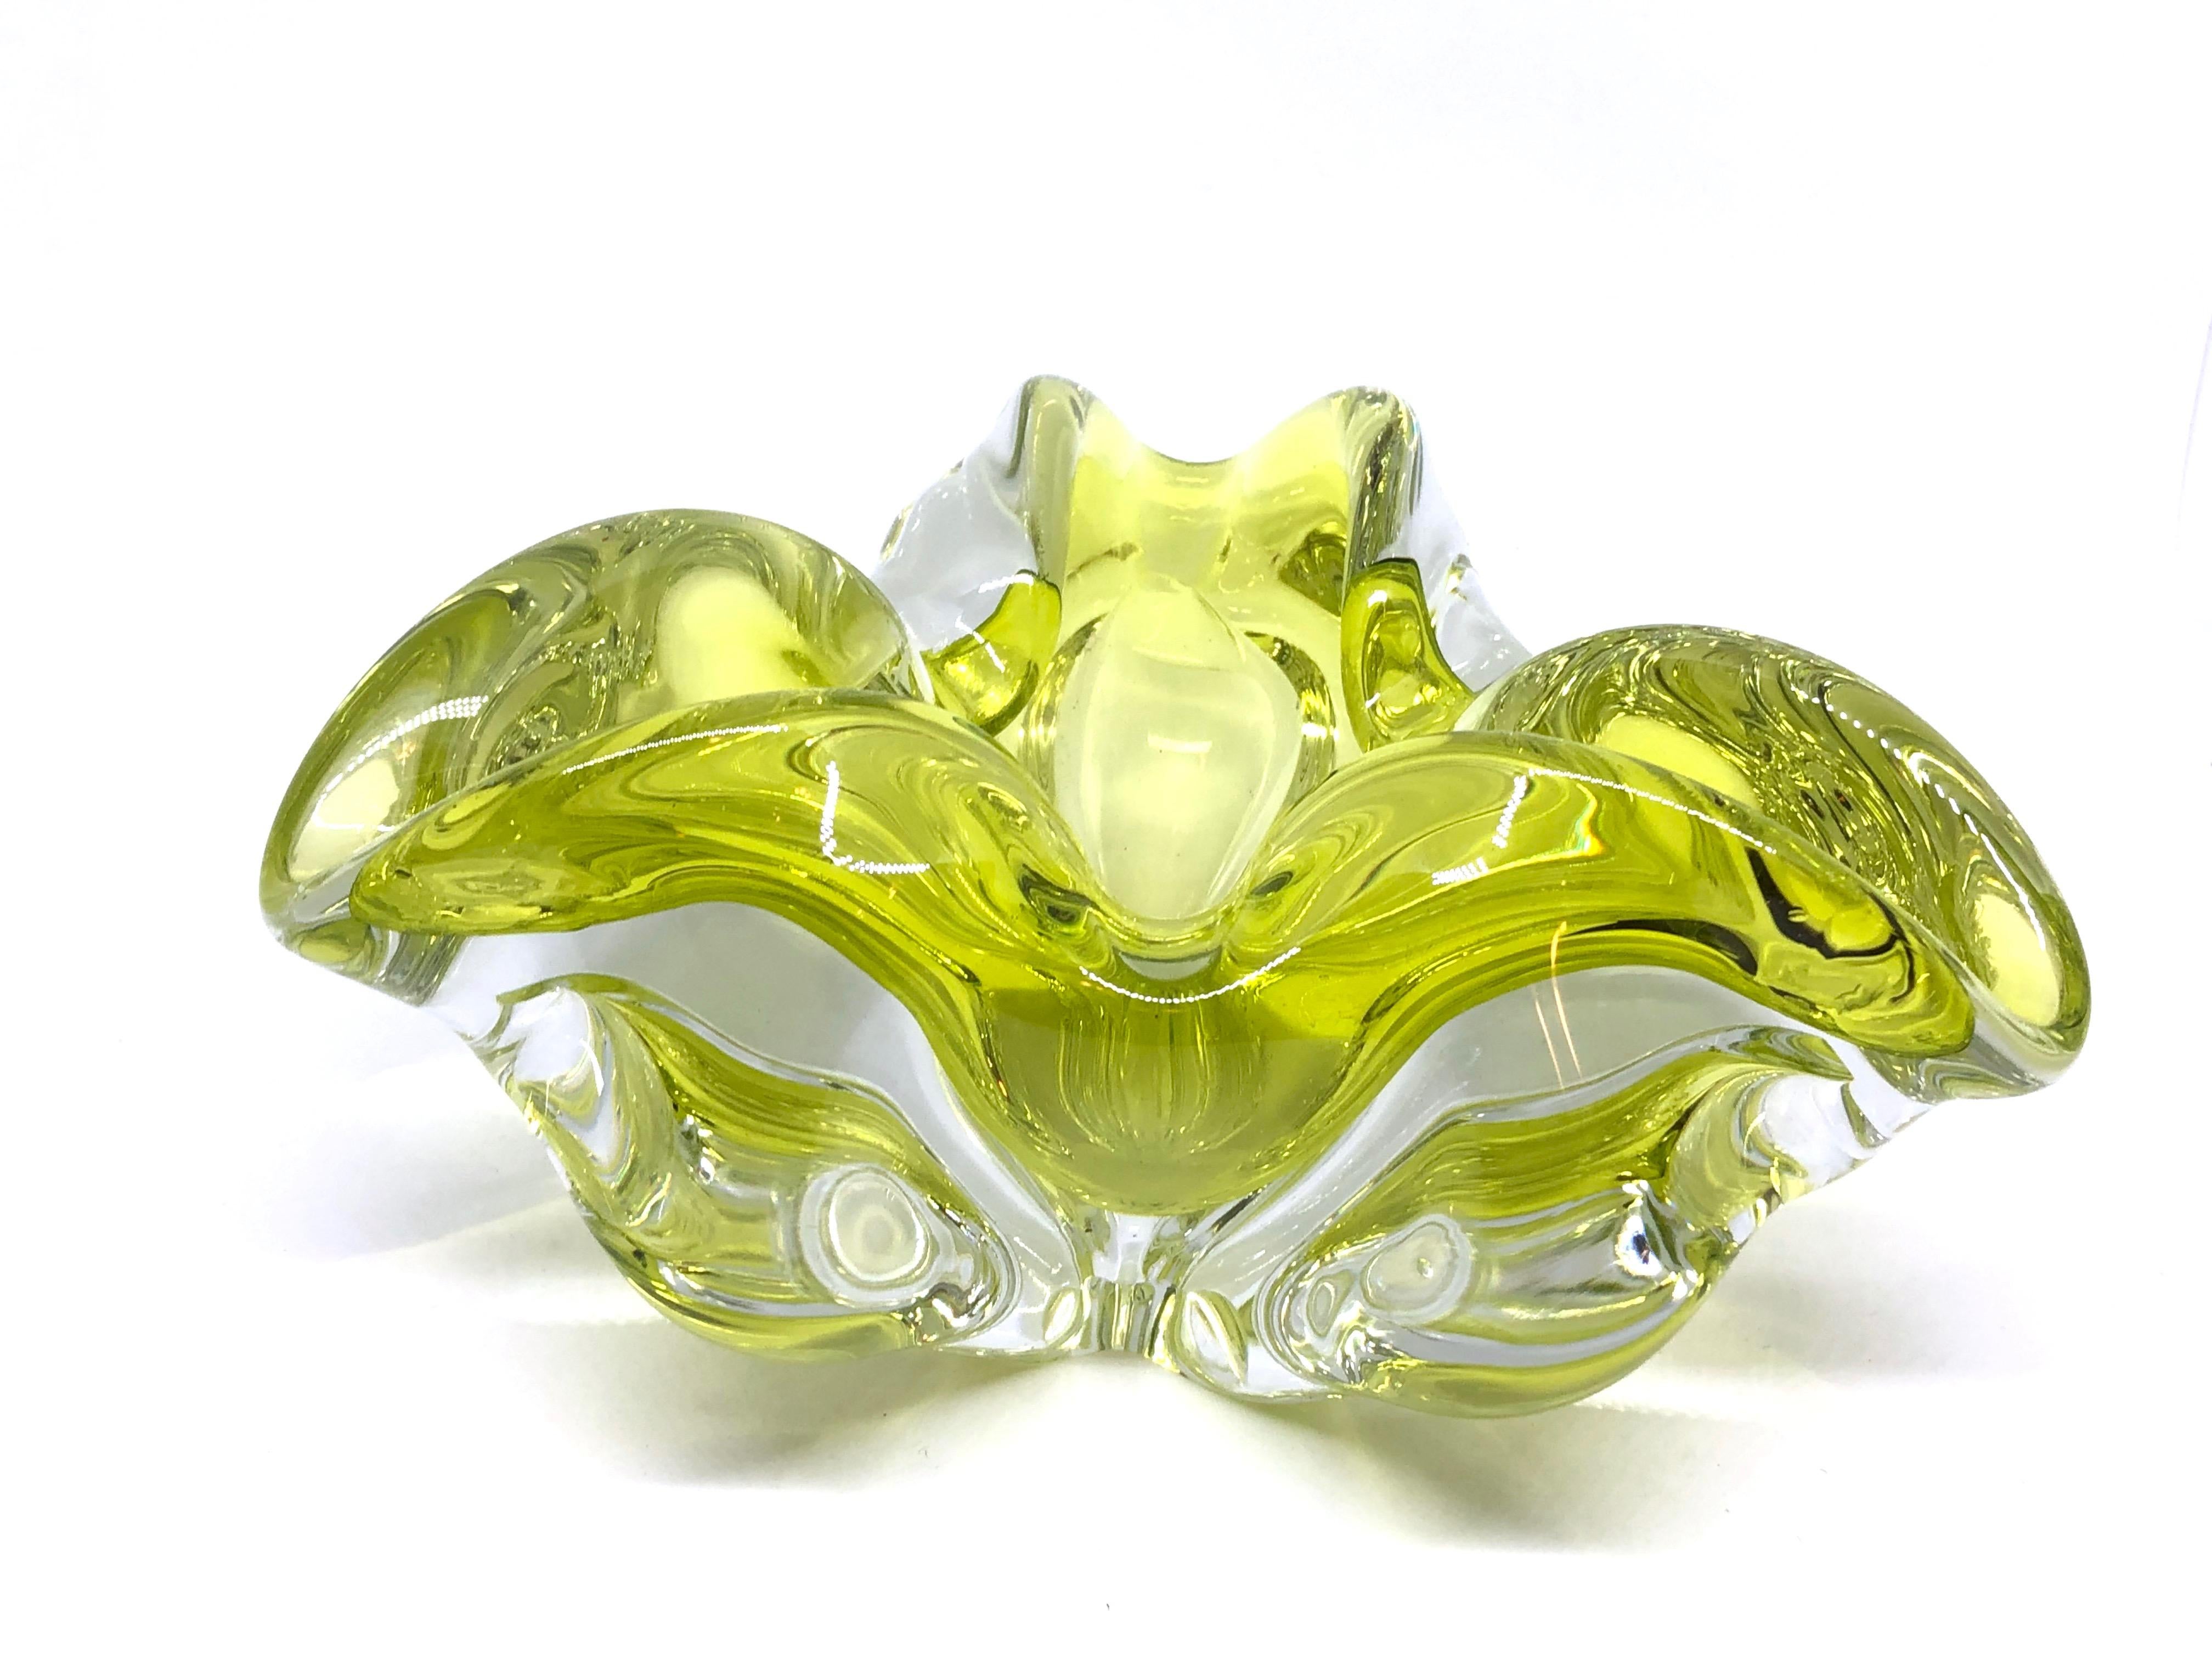 An amazing Venetian Murano glass object in an unusual design and a pretty beautiful lime green and clear color. A highly decorative piece useful as center piece, bowl, candy bowl or catchall, Italy, 1970s.